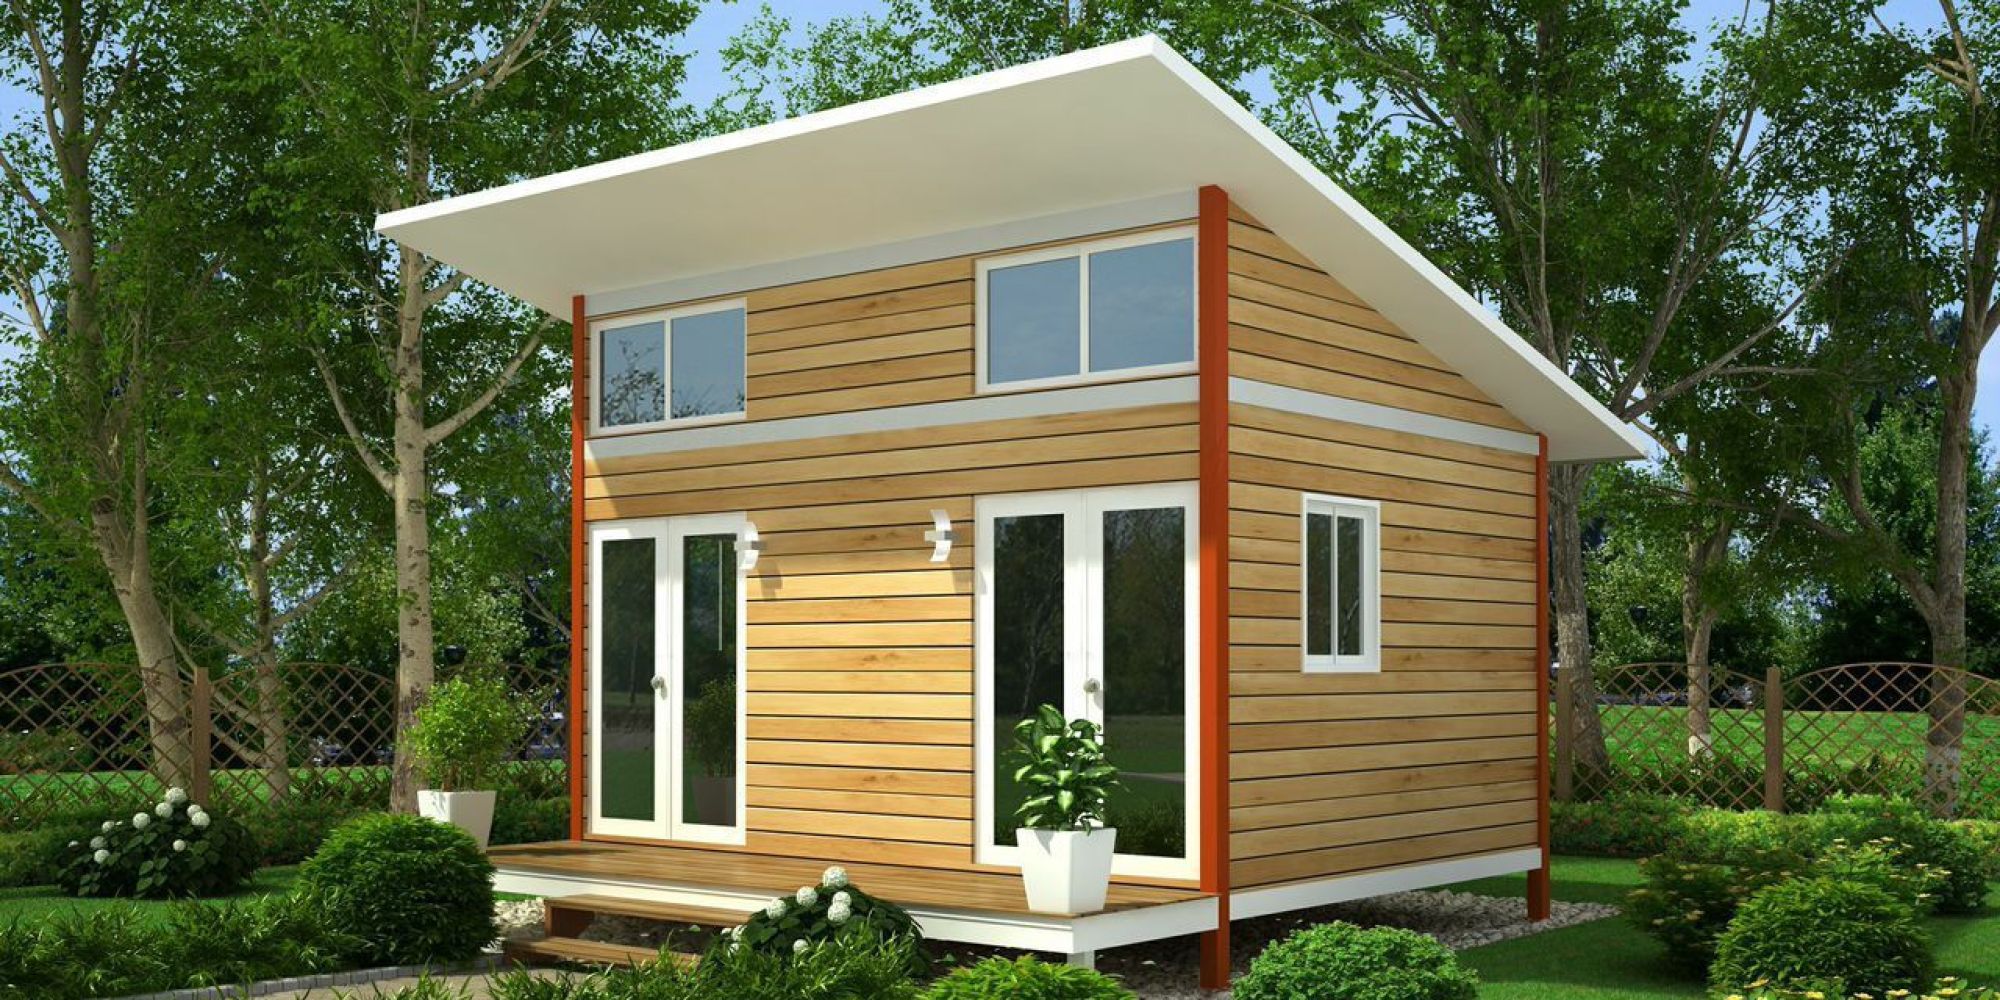 Image result for tiny homes